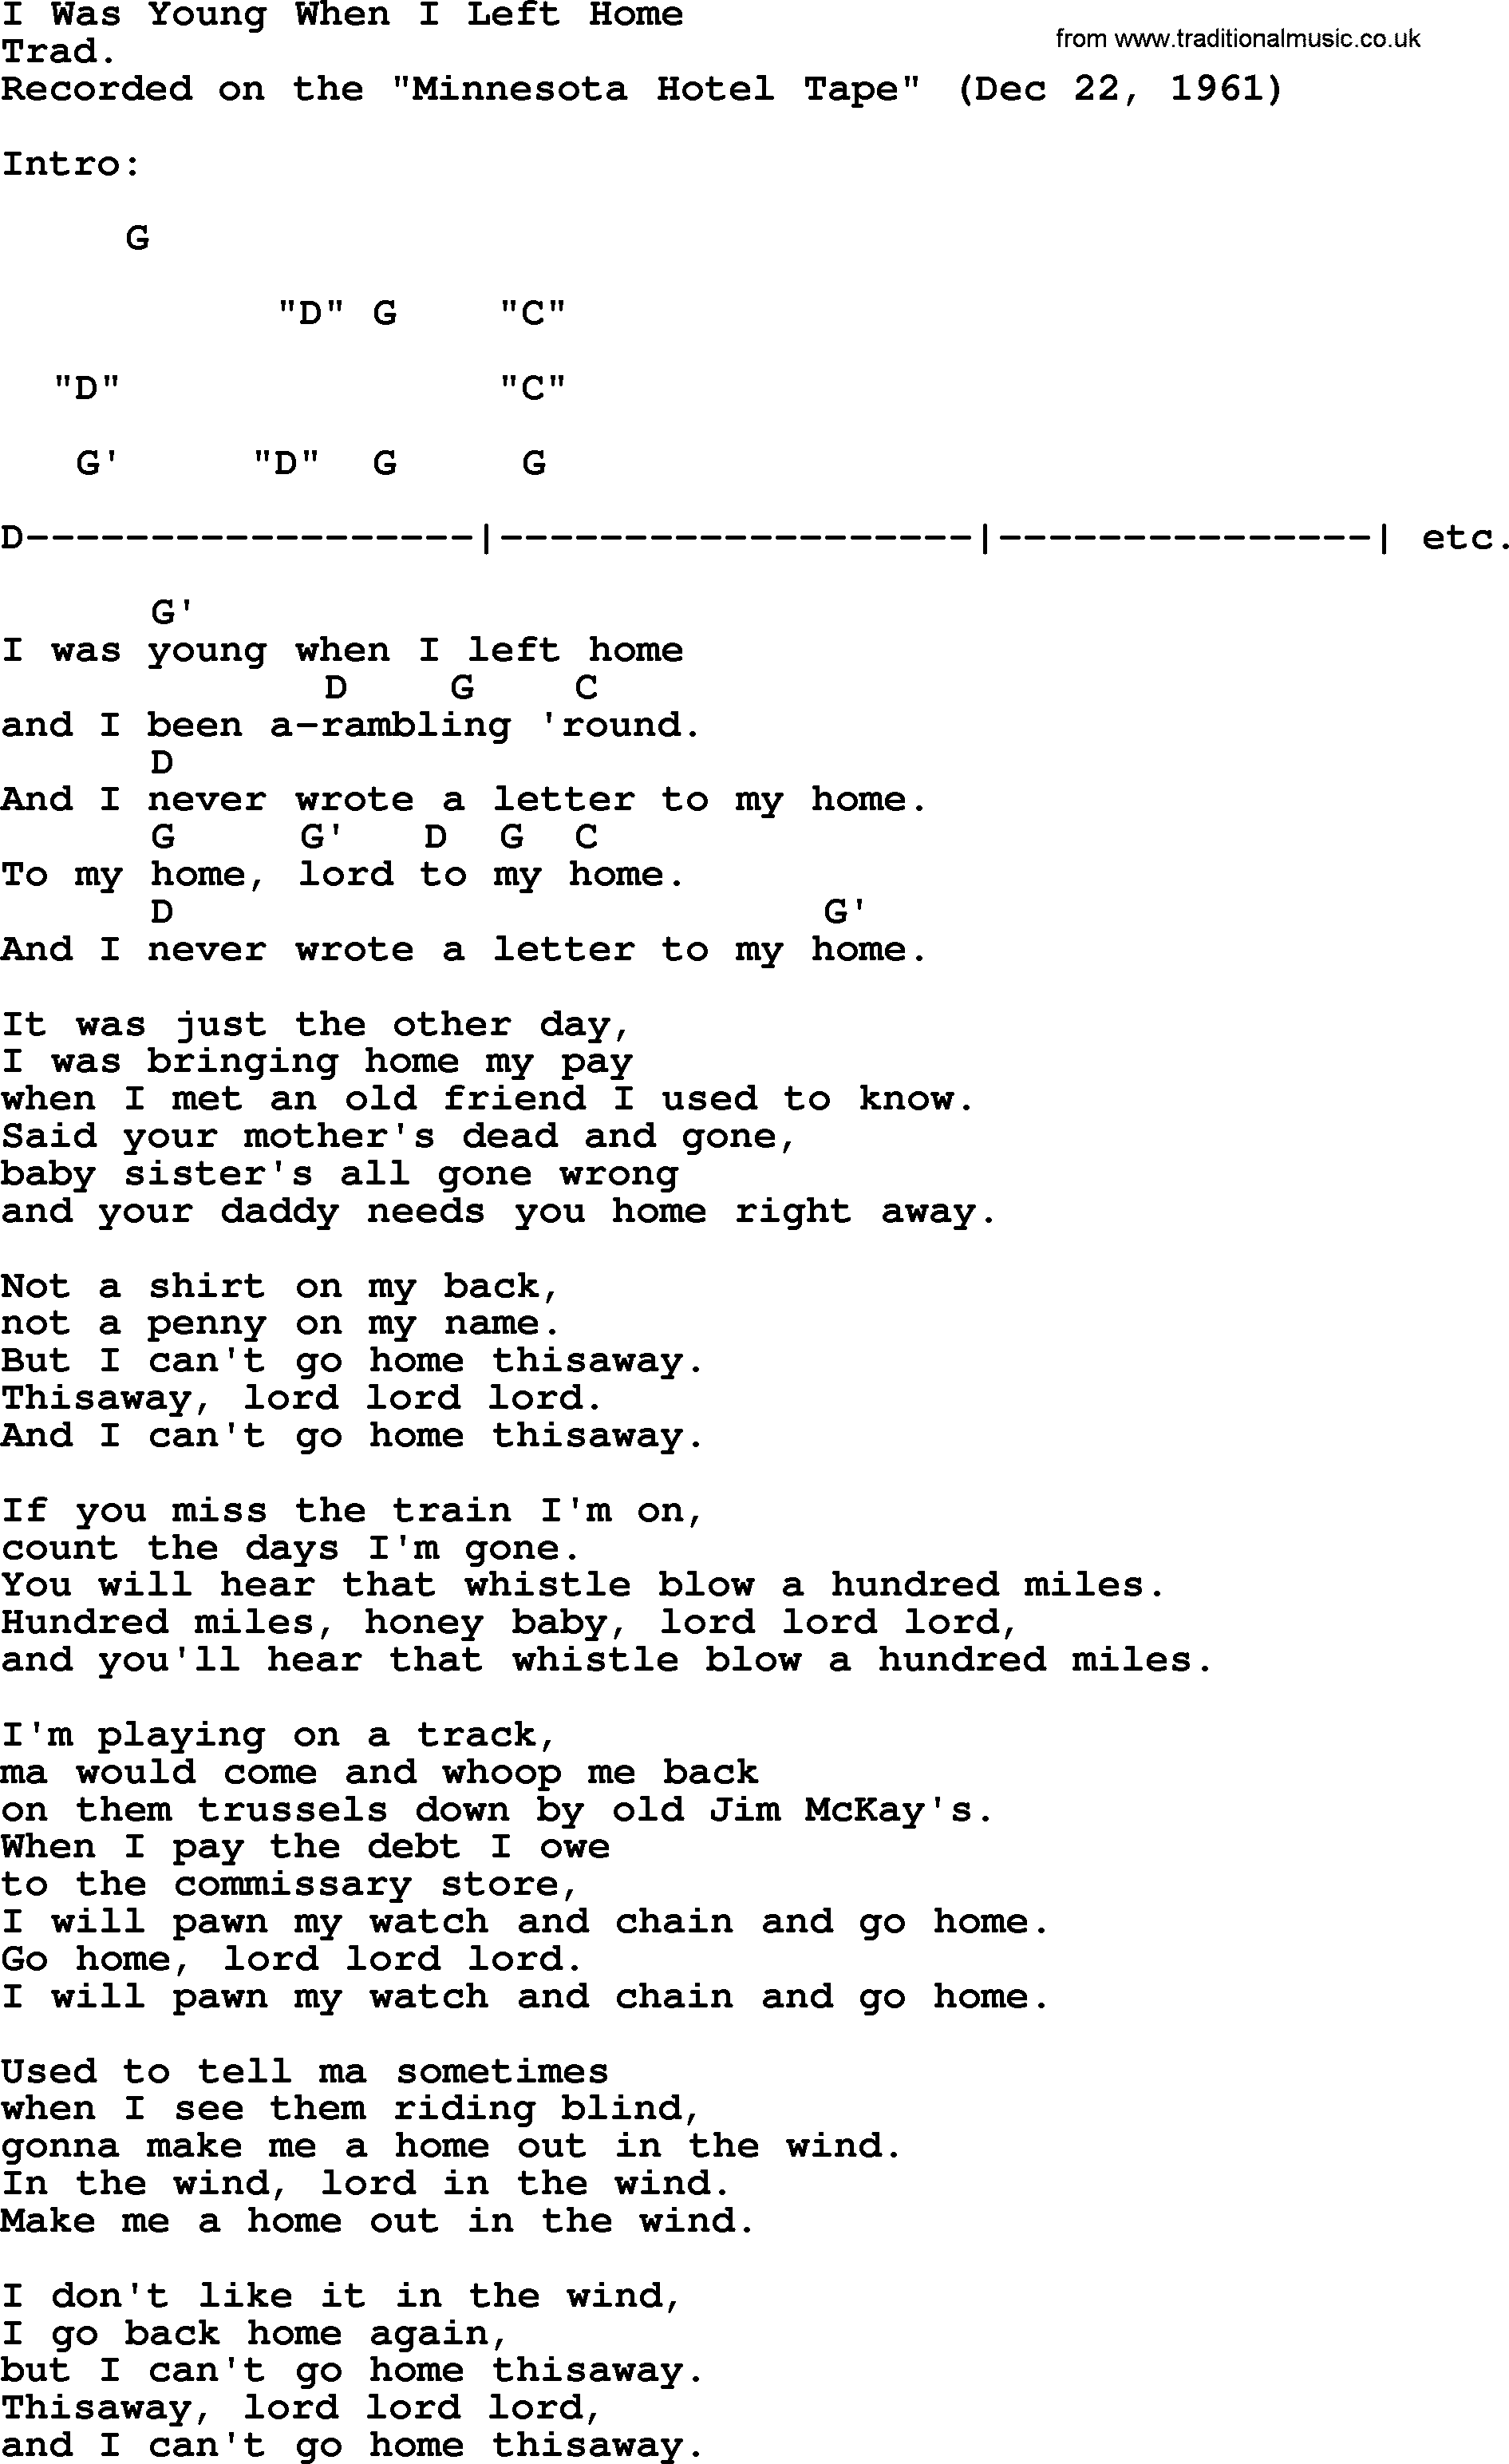 Bob Dylan song, lyrics with chords - I Was Young When I Left Home